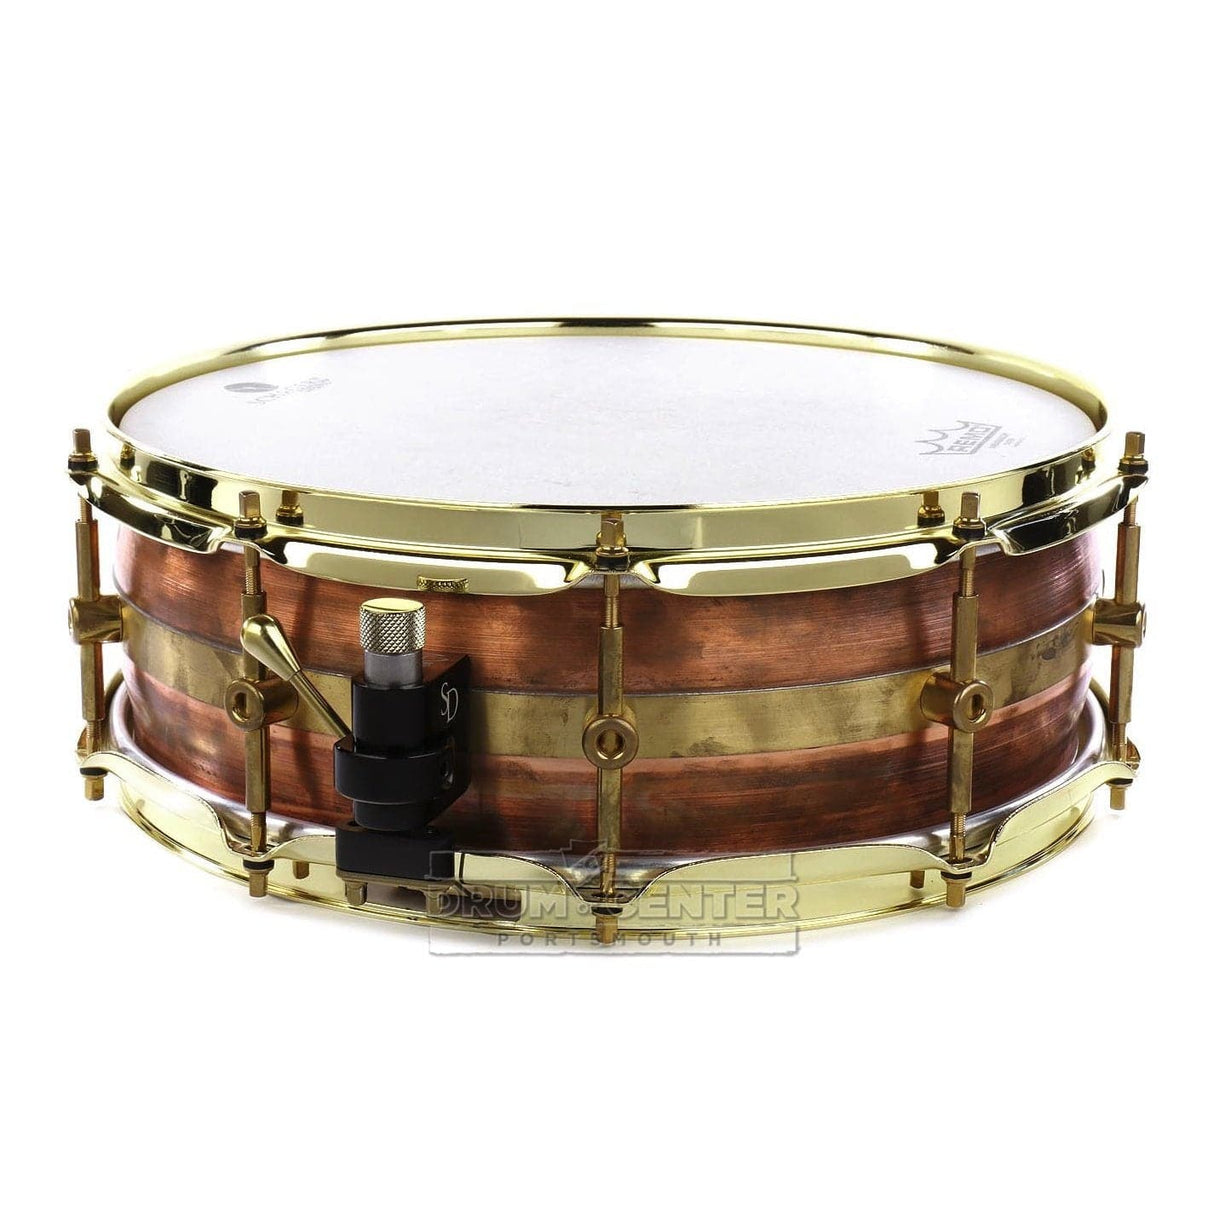 Schagerl Persephone Snare Drum 14x5 Copper, Raw